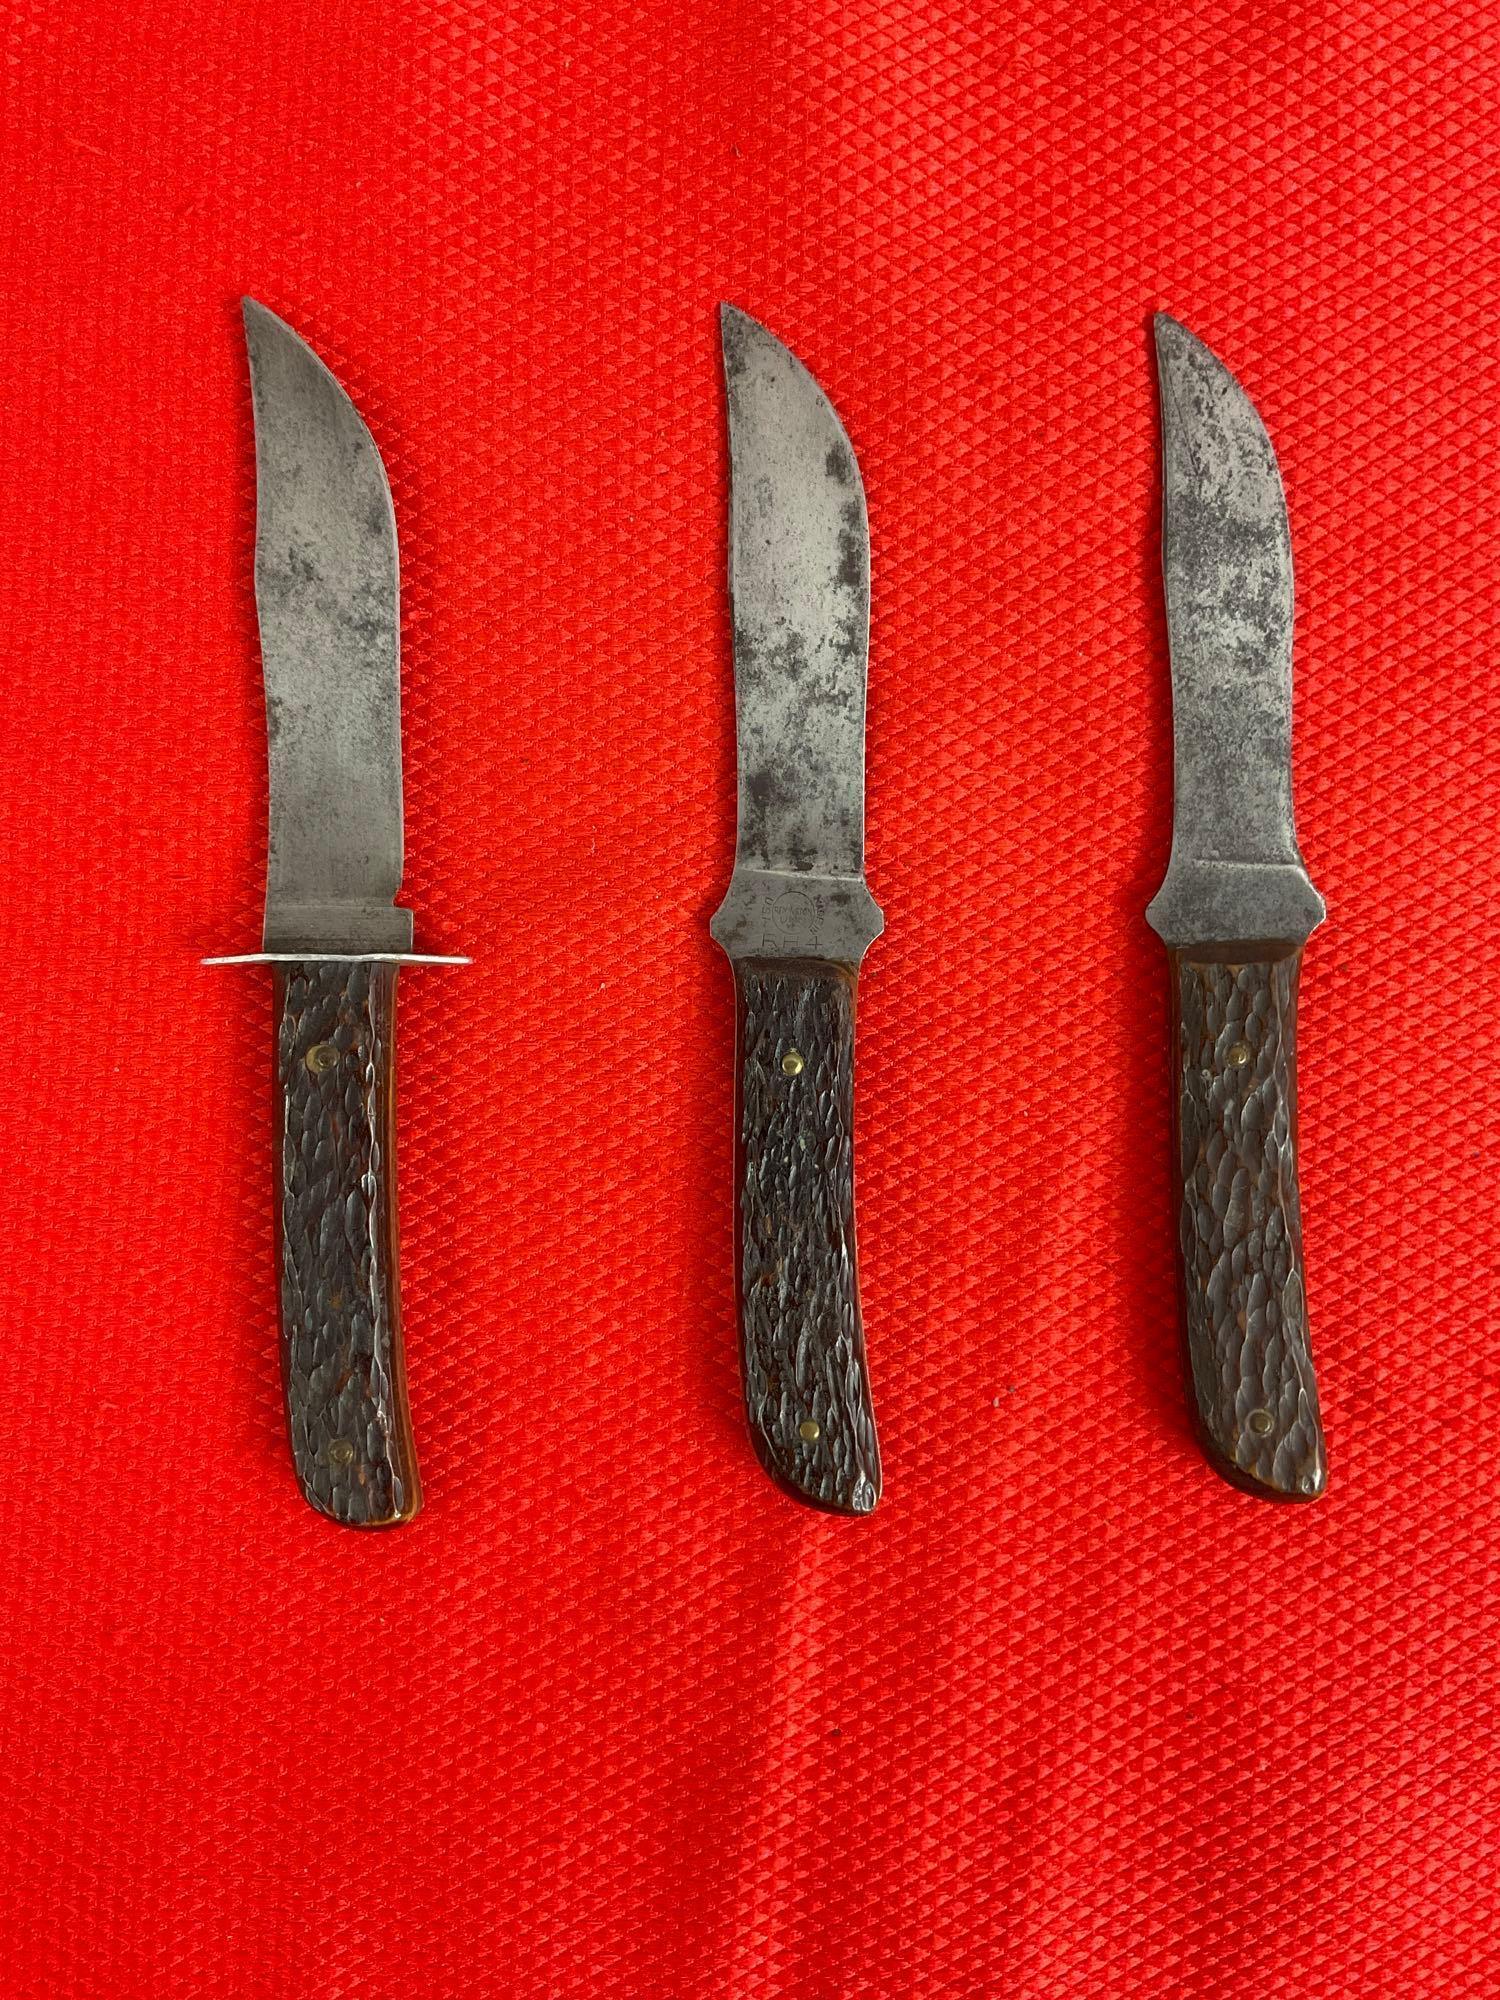 3 pcs Vintage Remington 4" Steel Fixed Blade Hunting Knives w/ Leather Sheathes Model RH-4. See